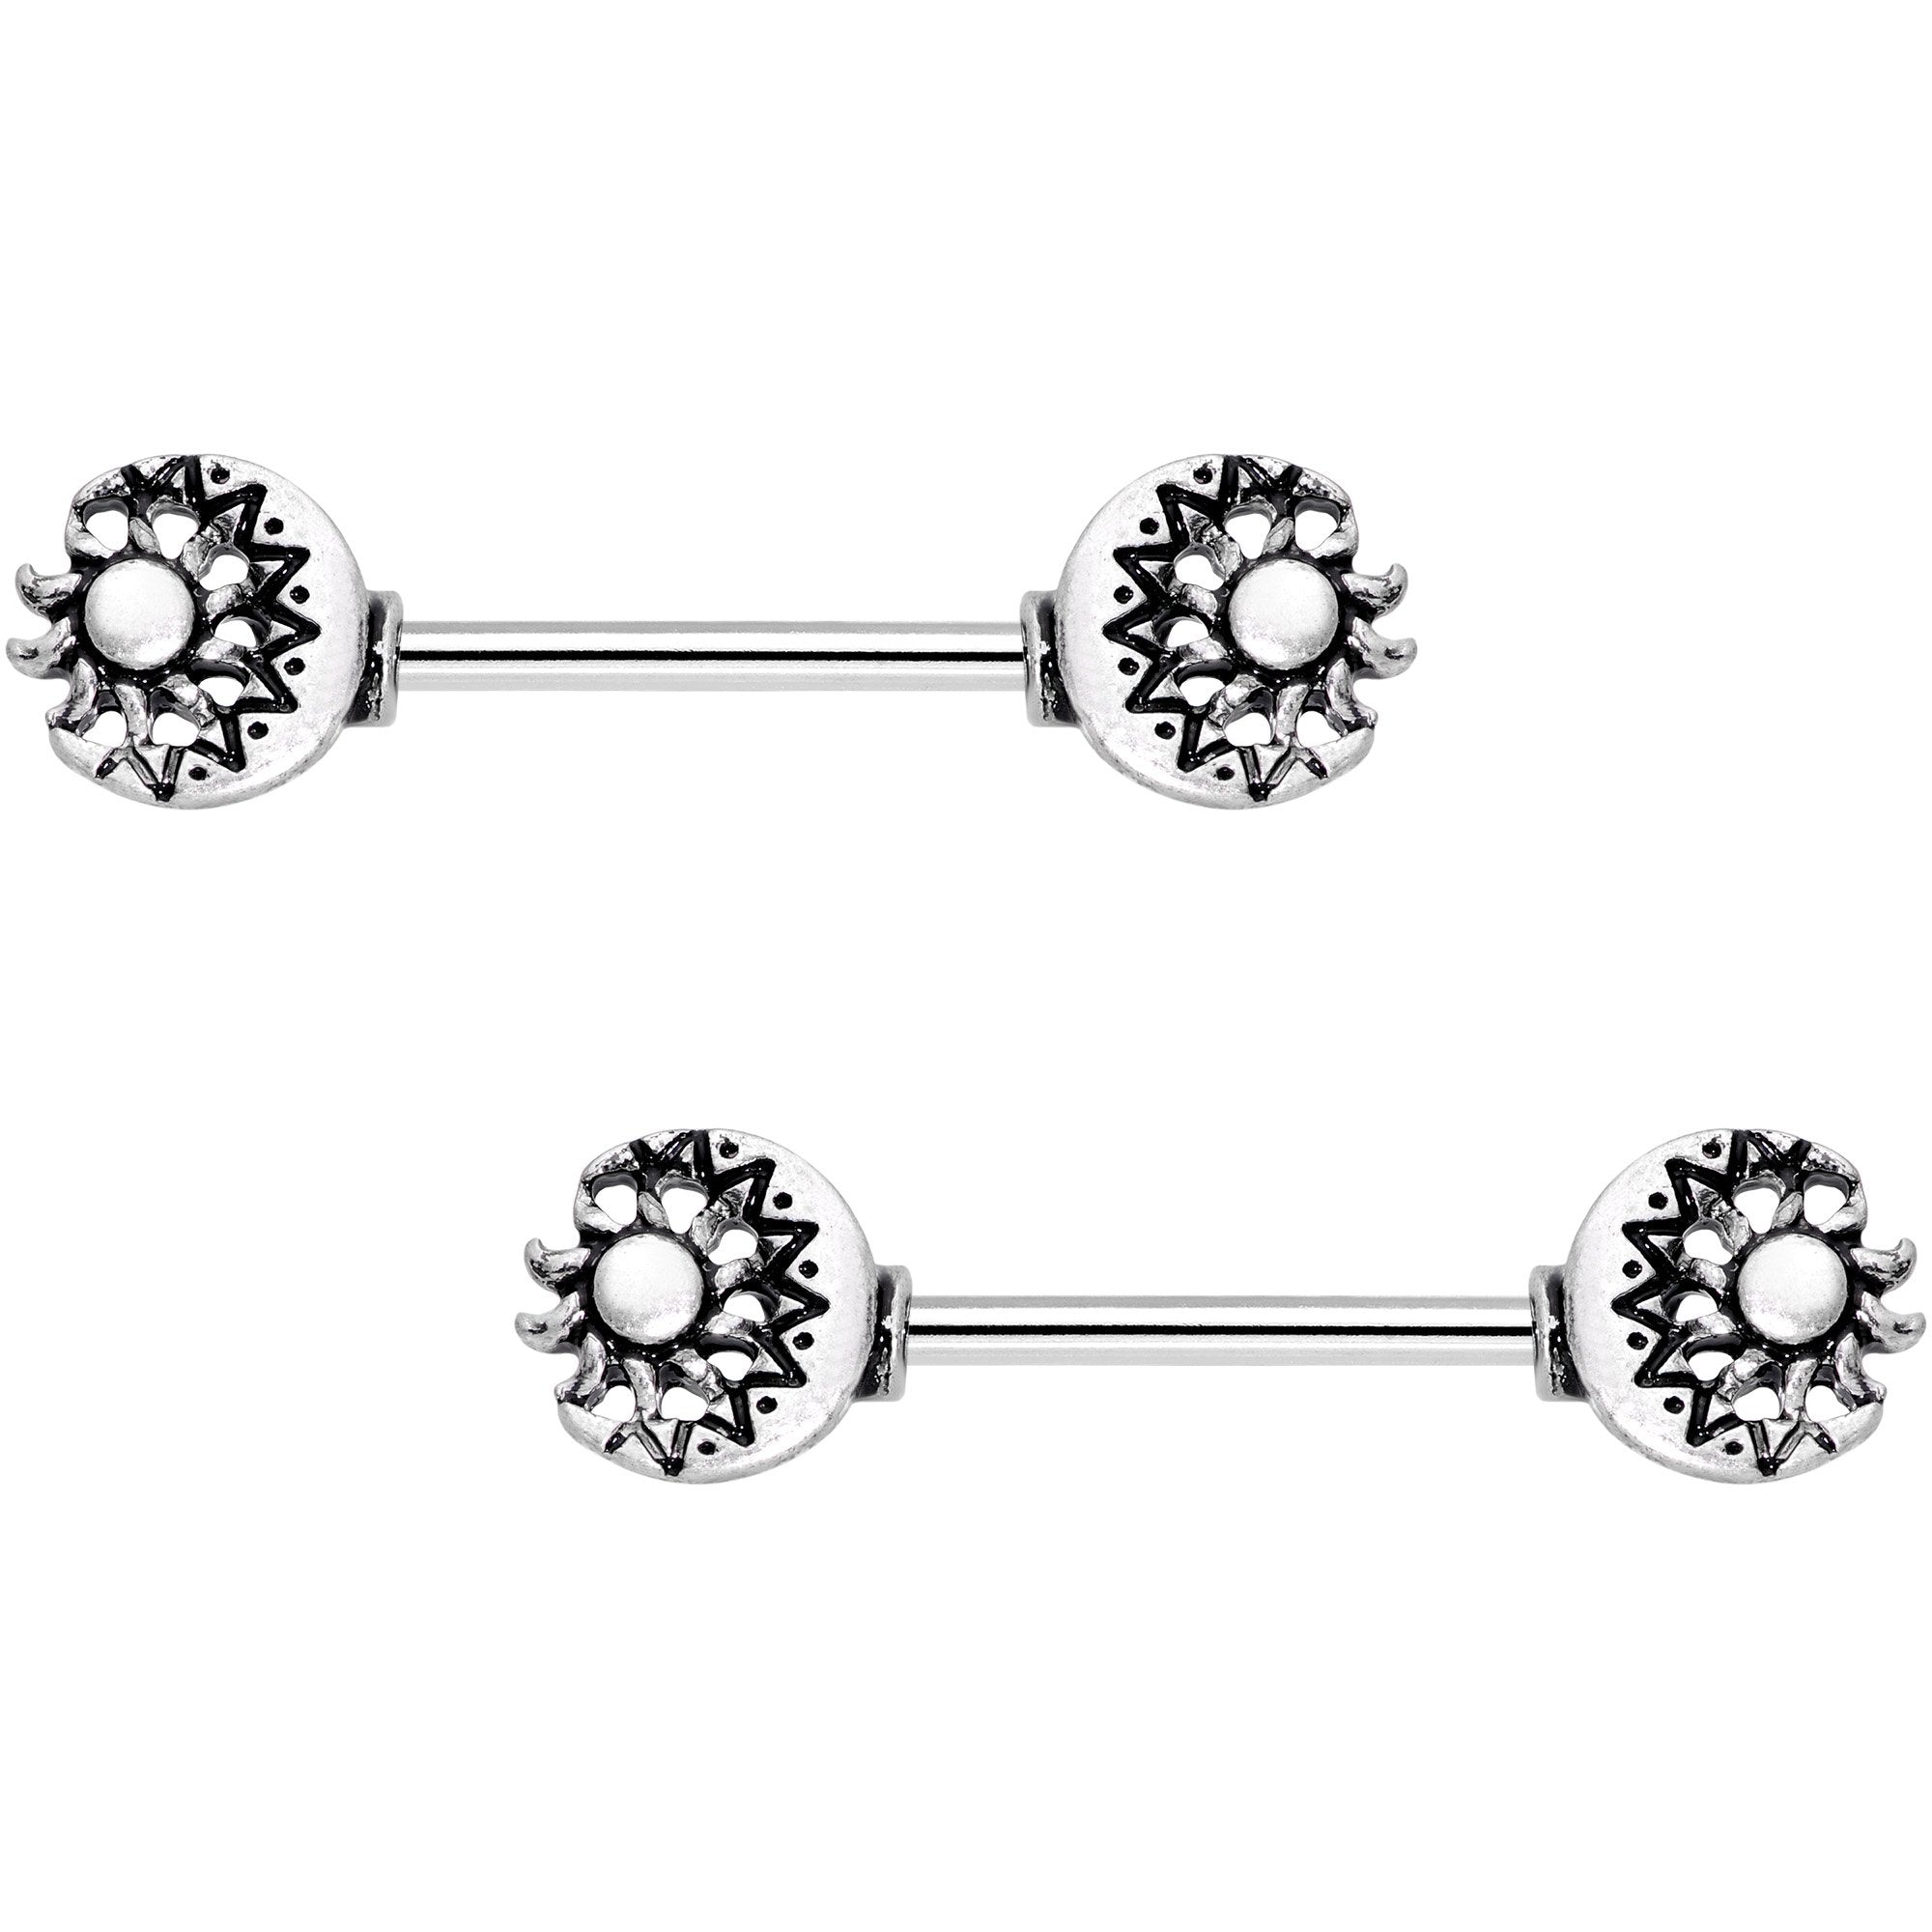 14 Gauge 9/16 Crescent Moon and Sun Barbell Nipple Ring Set